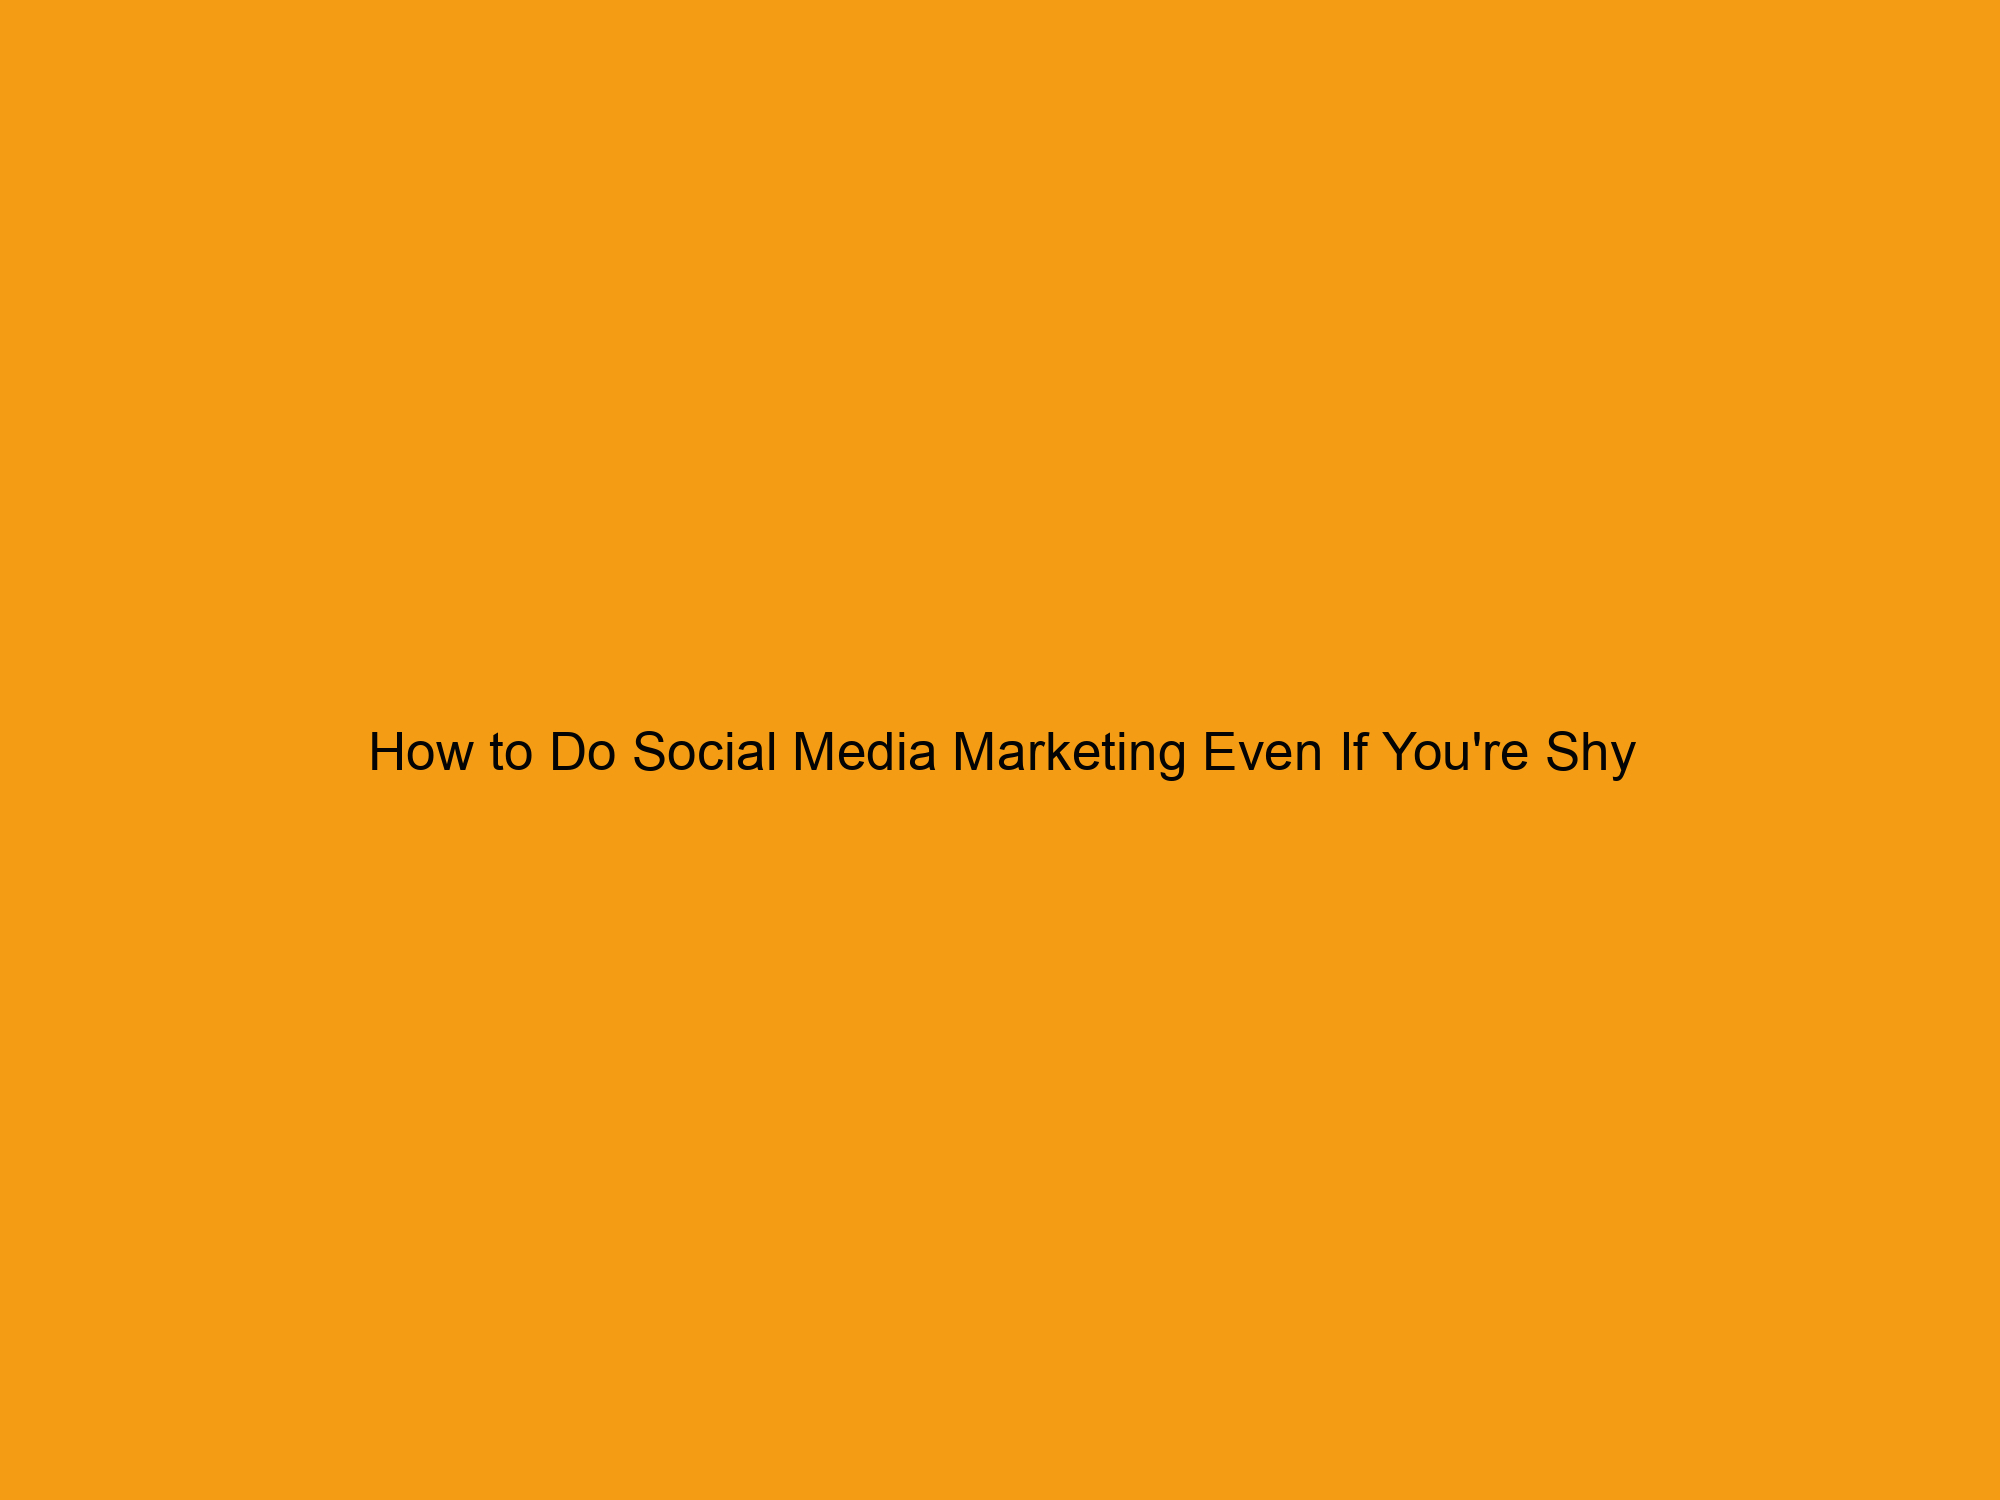 How to Do Social Media Marketing Even If You’re Shy